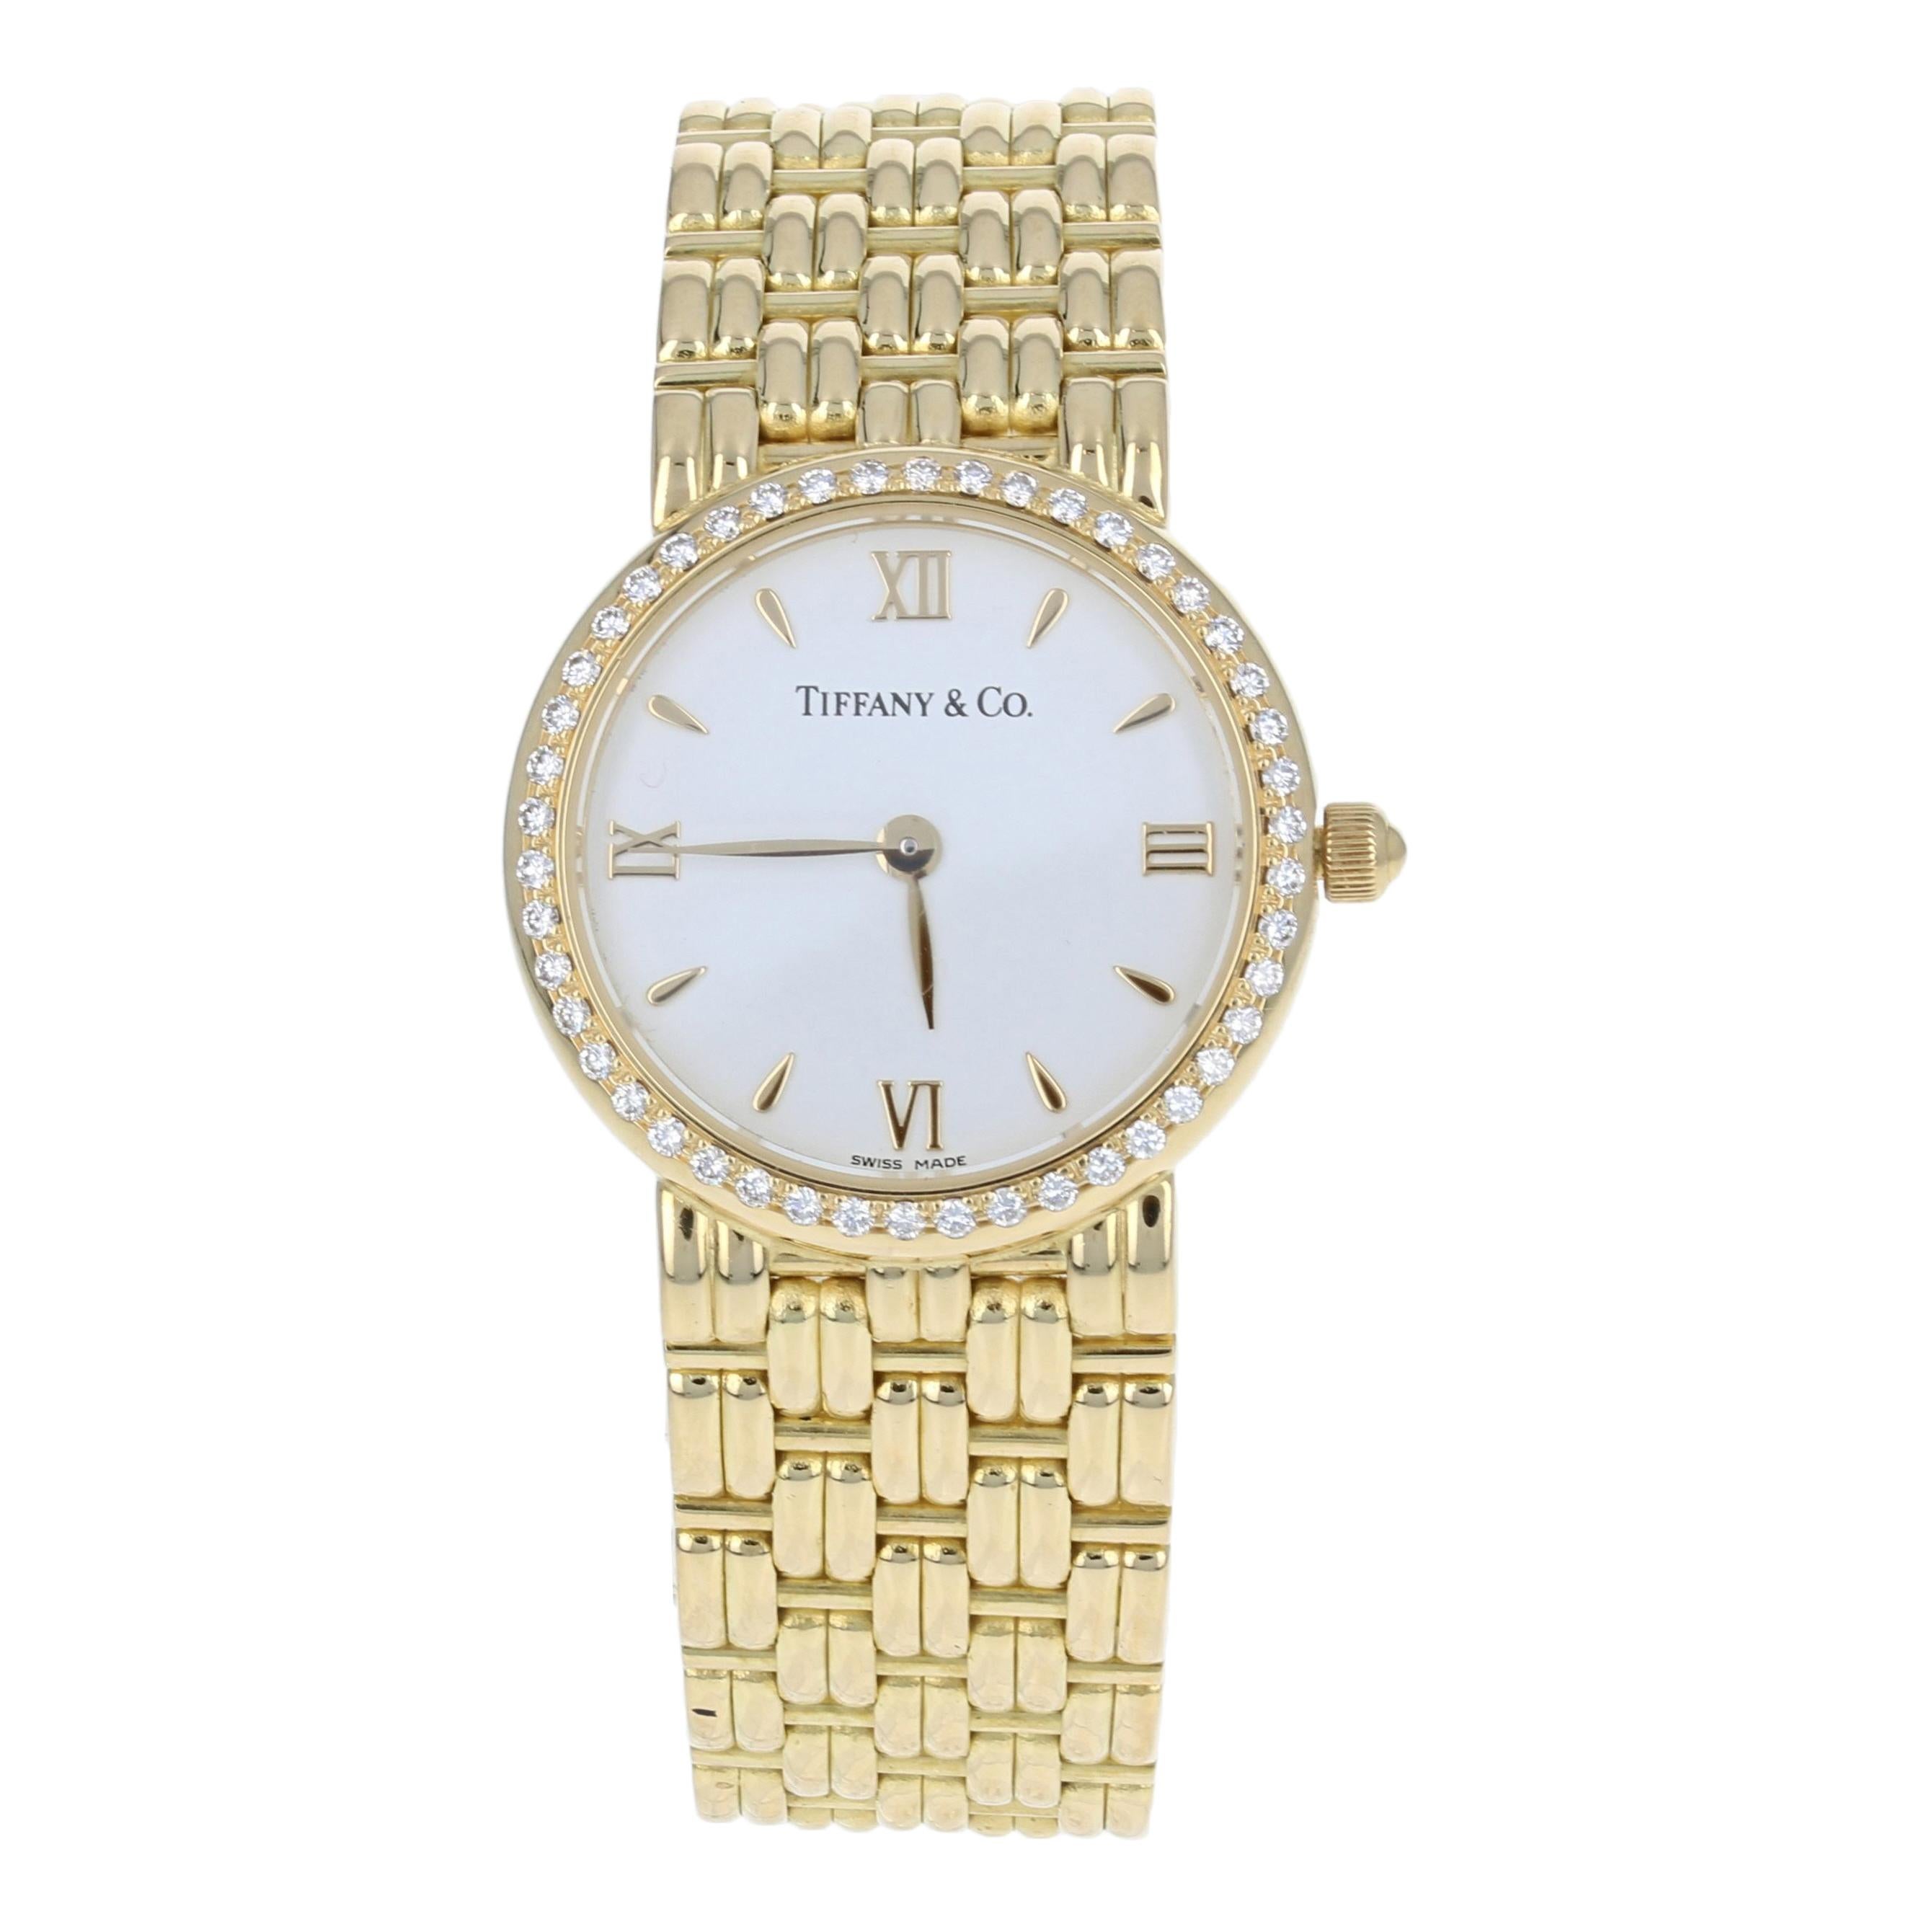 This is an authentic Tiffany & Co. wristwatch. The watch has been professionally serviced and comes with a two-year warranty.

Brand: Tiffany & Co. 
Material: 18k Yellow Gold

Stone Information:
Natural Diamonds  
Clarity: VS1 
Color: F  
Cut: Round